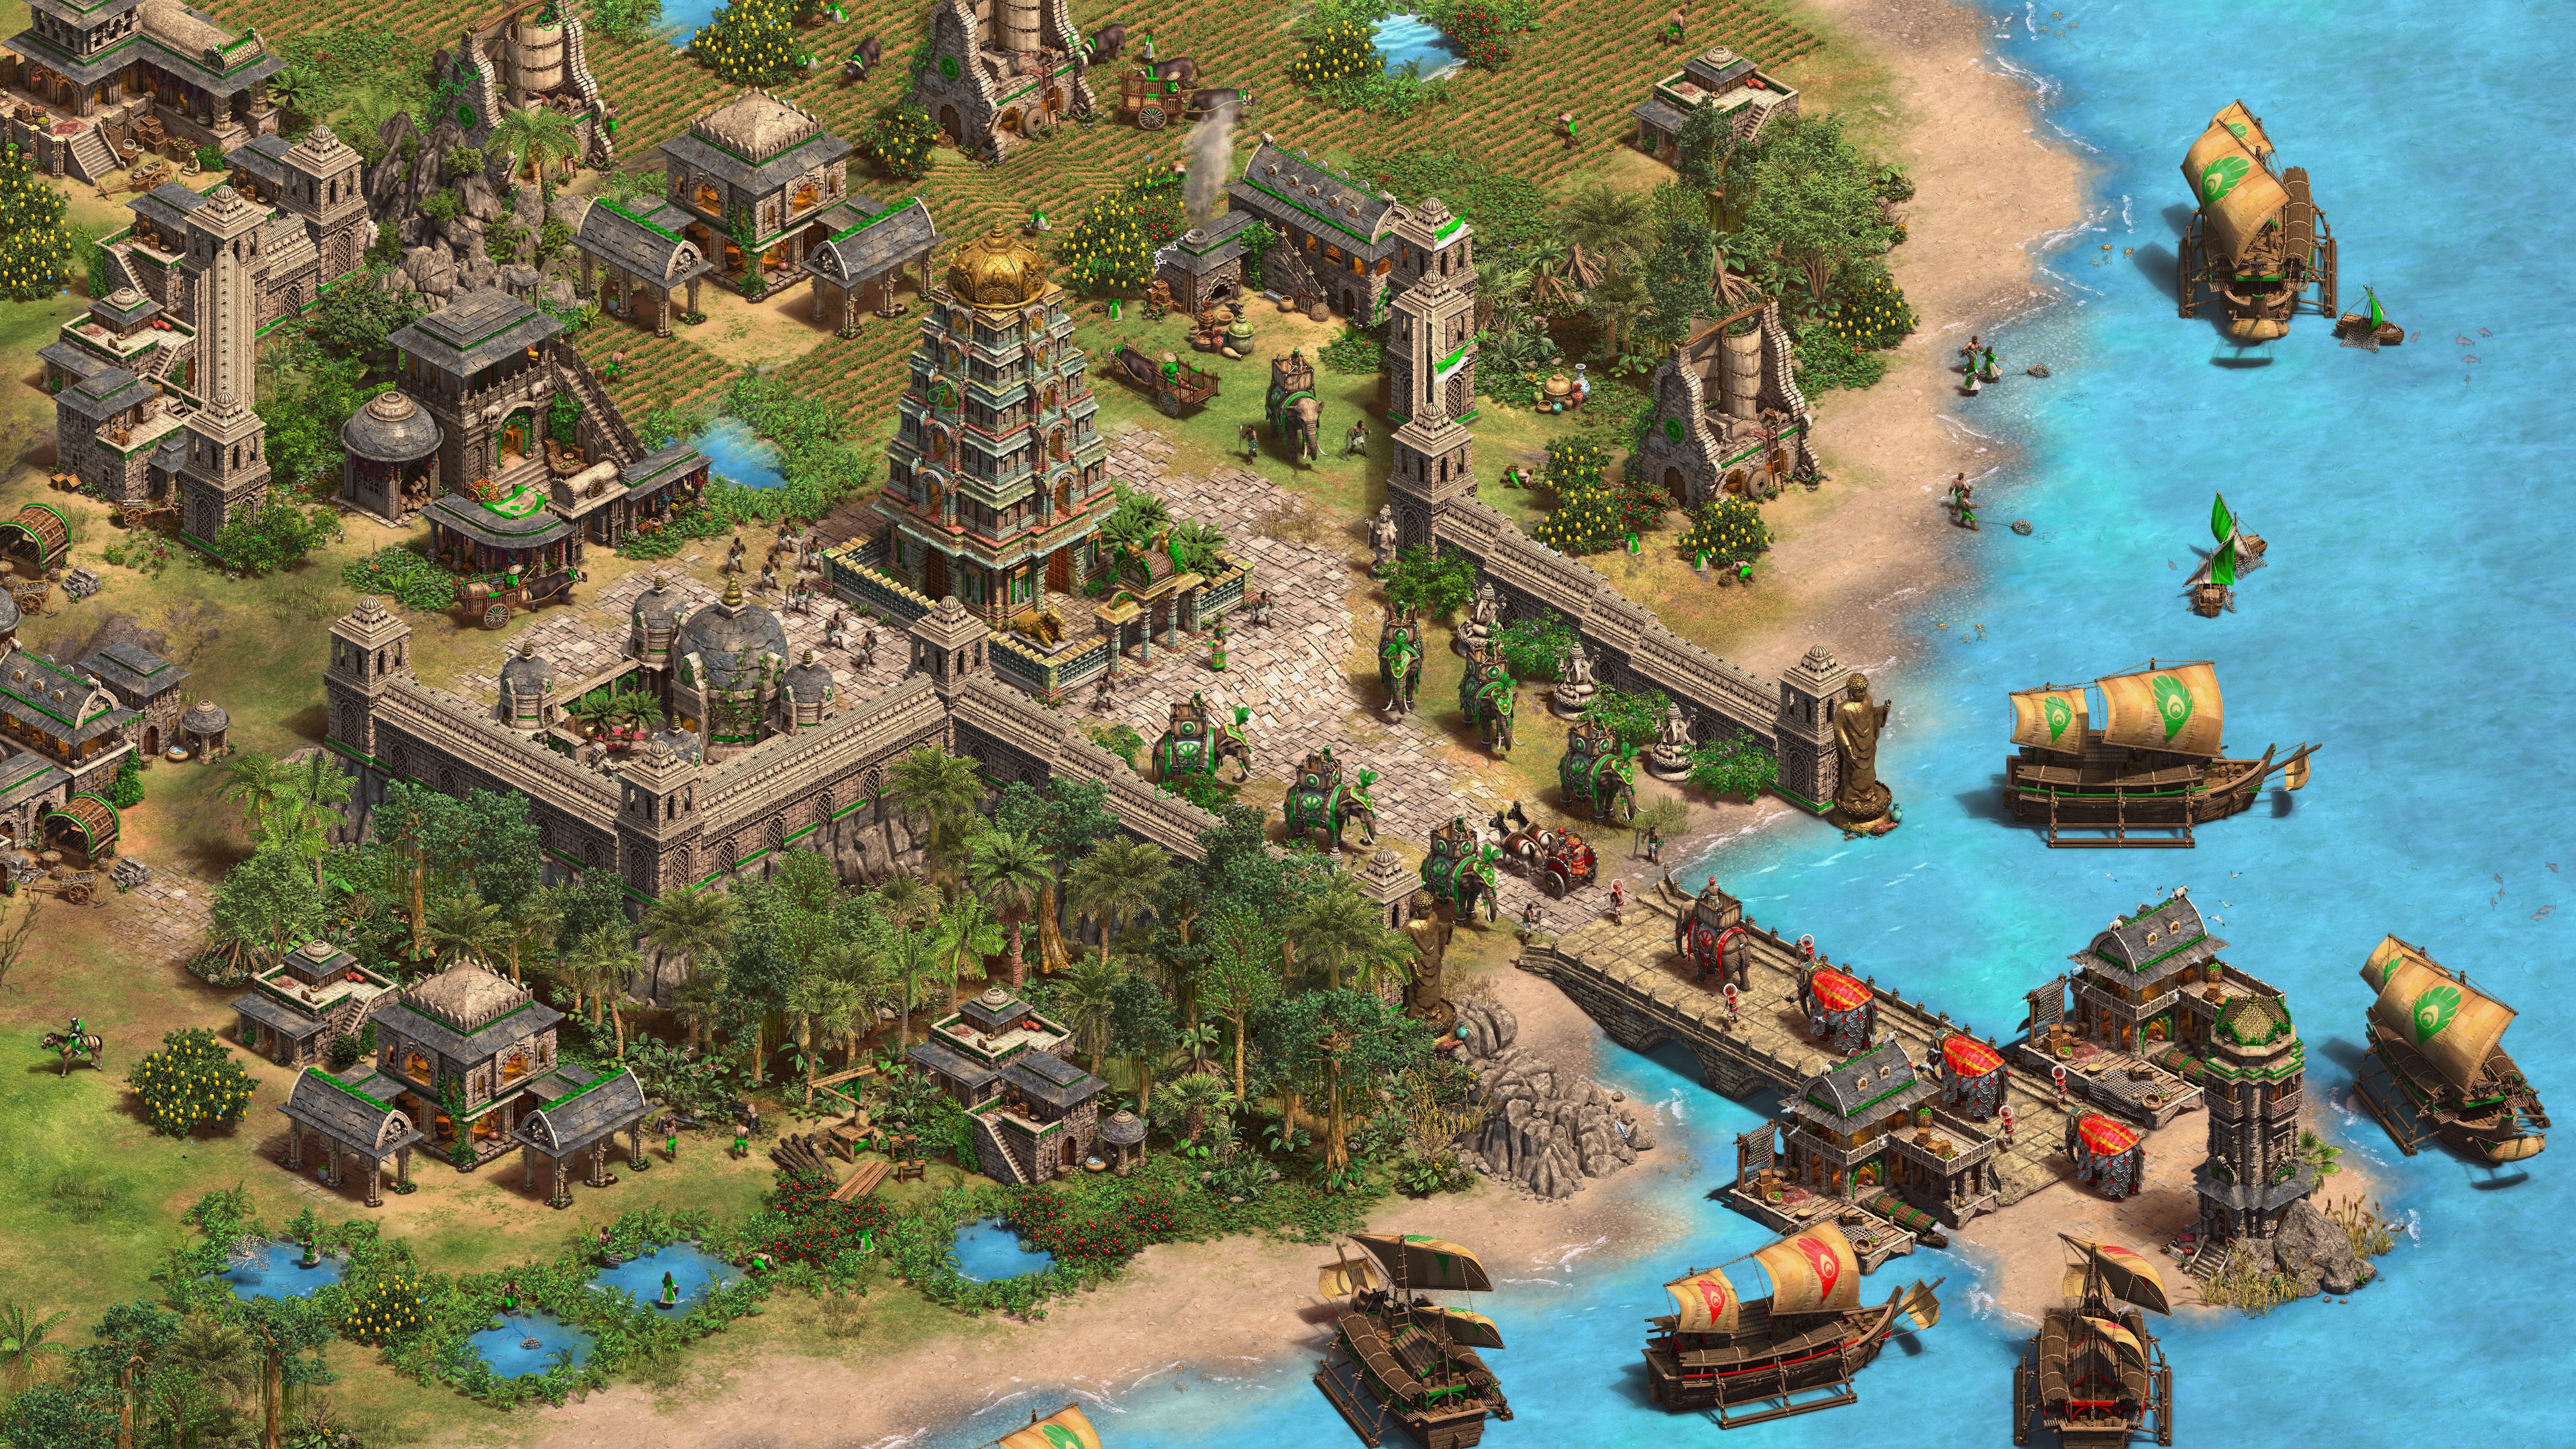 Age of Empires II: Definitive Edition - Dynasties of India screenshot 52477